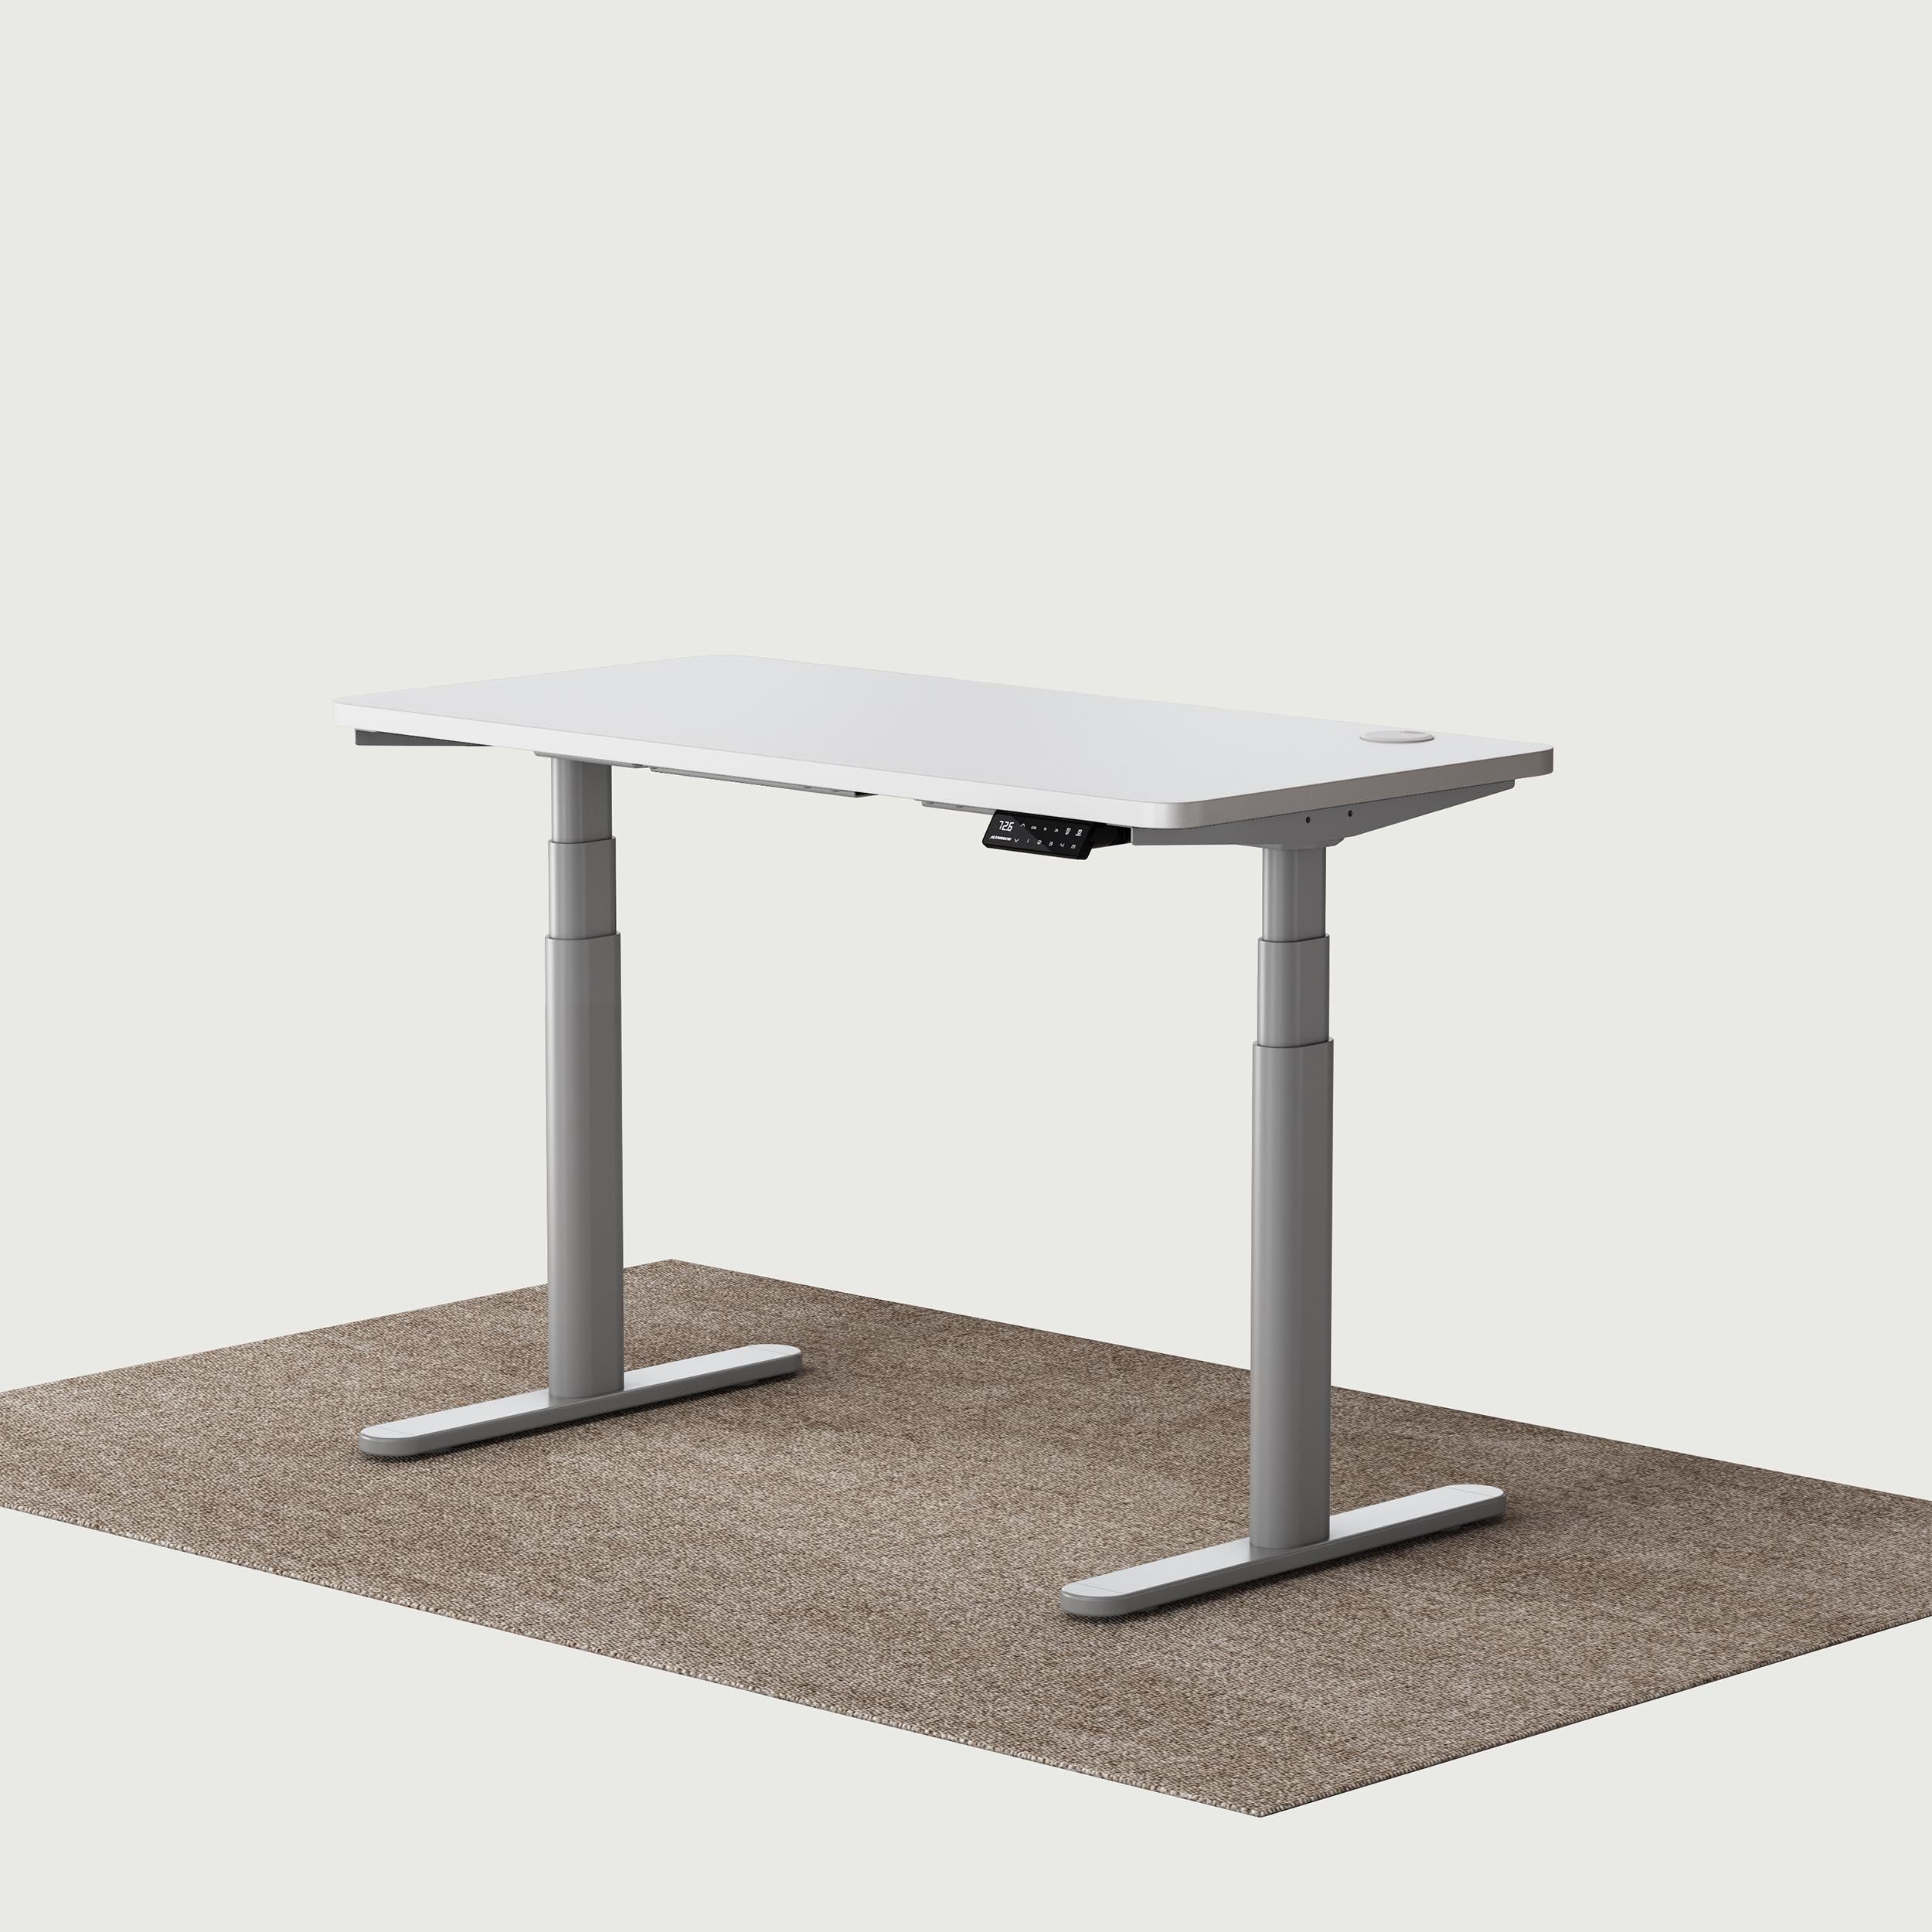 TH2 Pro Plus grey oval electric standing desk frame with white 120x60 cm desktop